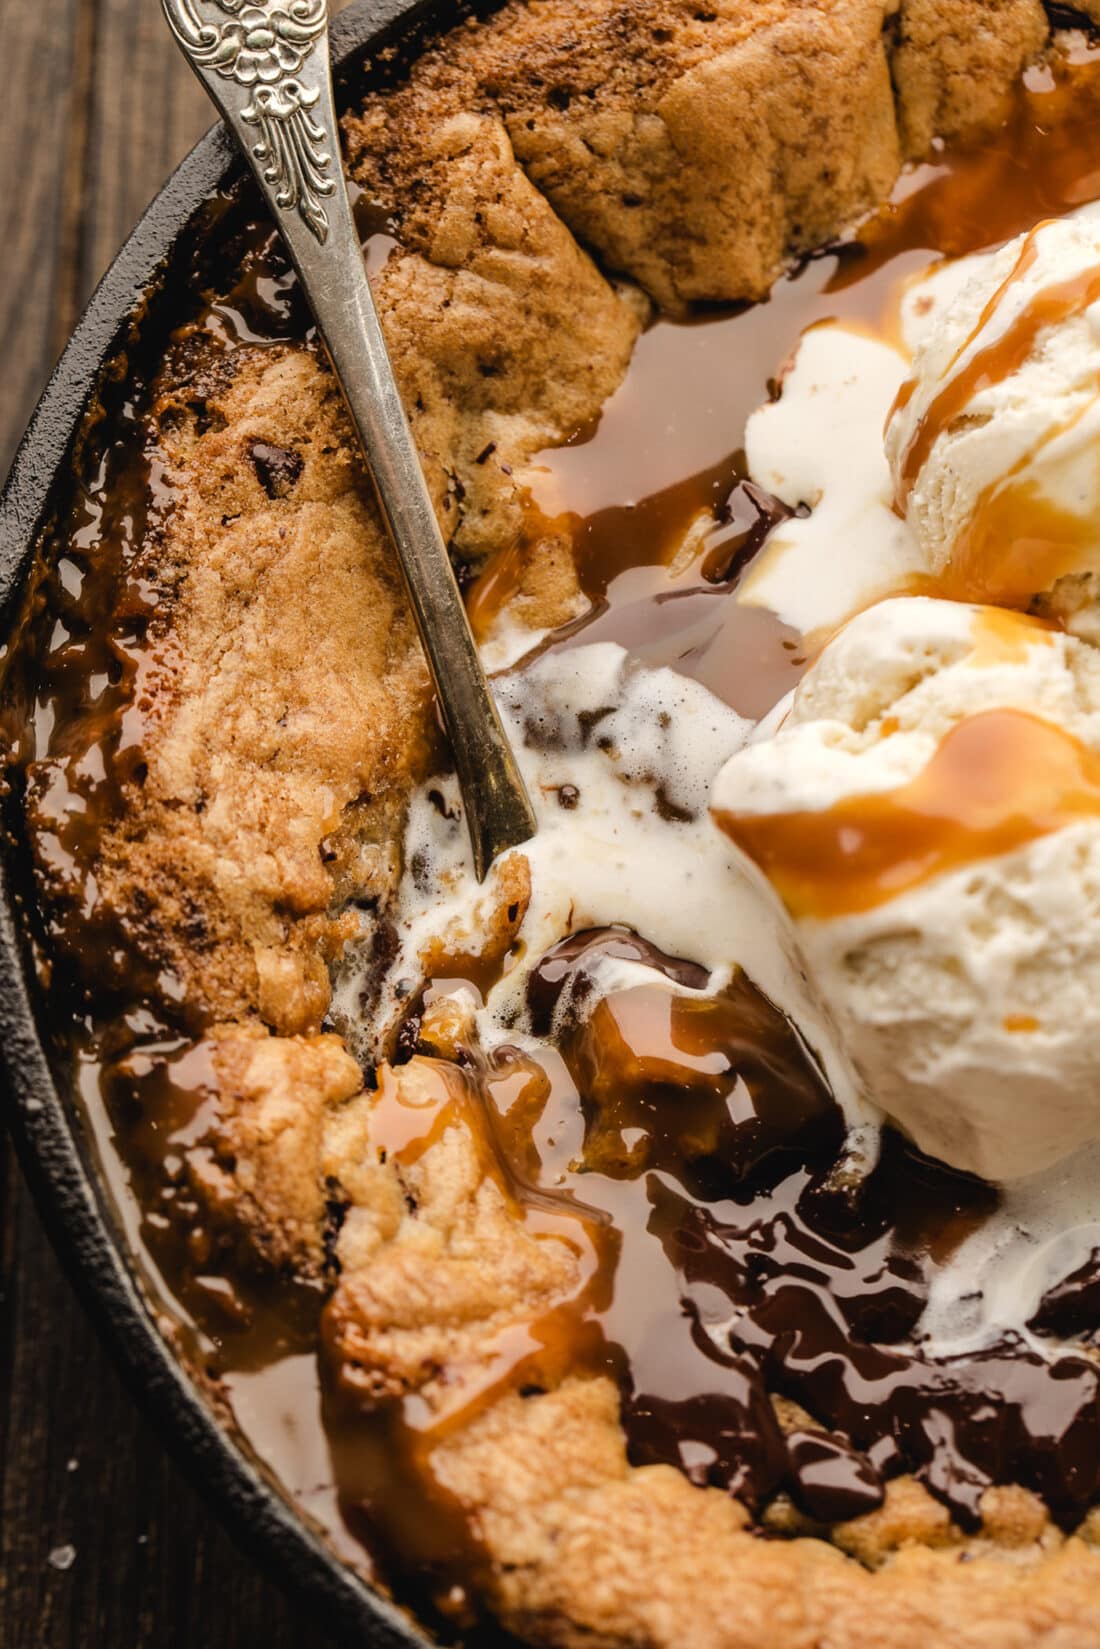 Spoon in a Chocolate Chip Caramel Skillet Cookie